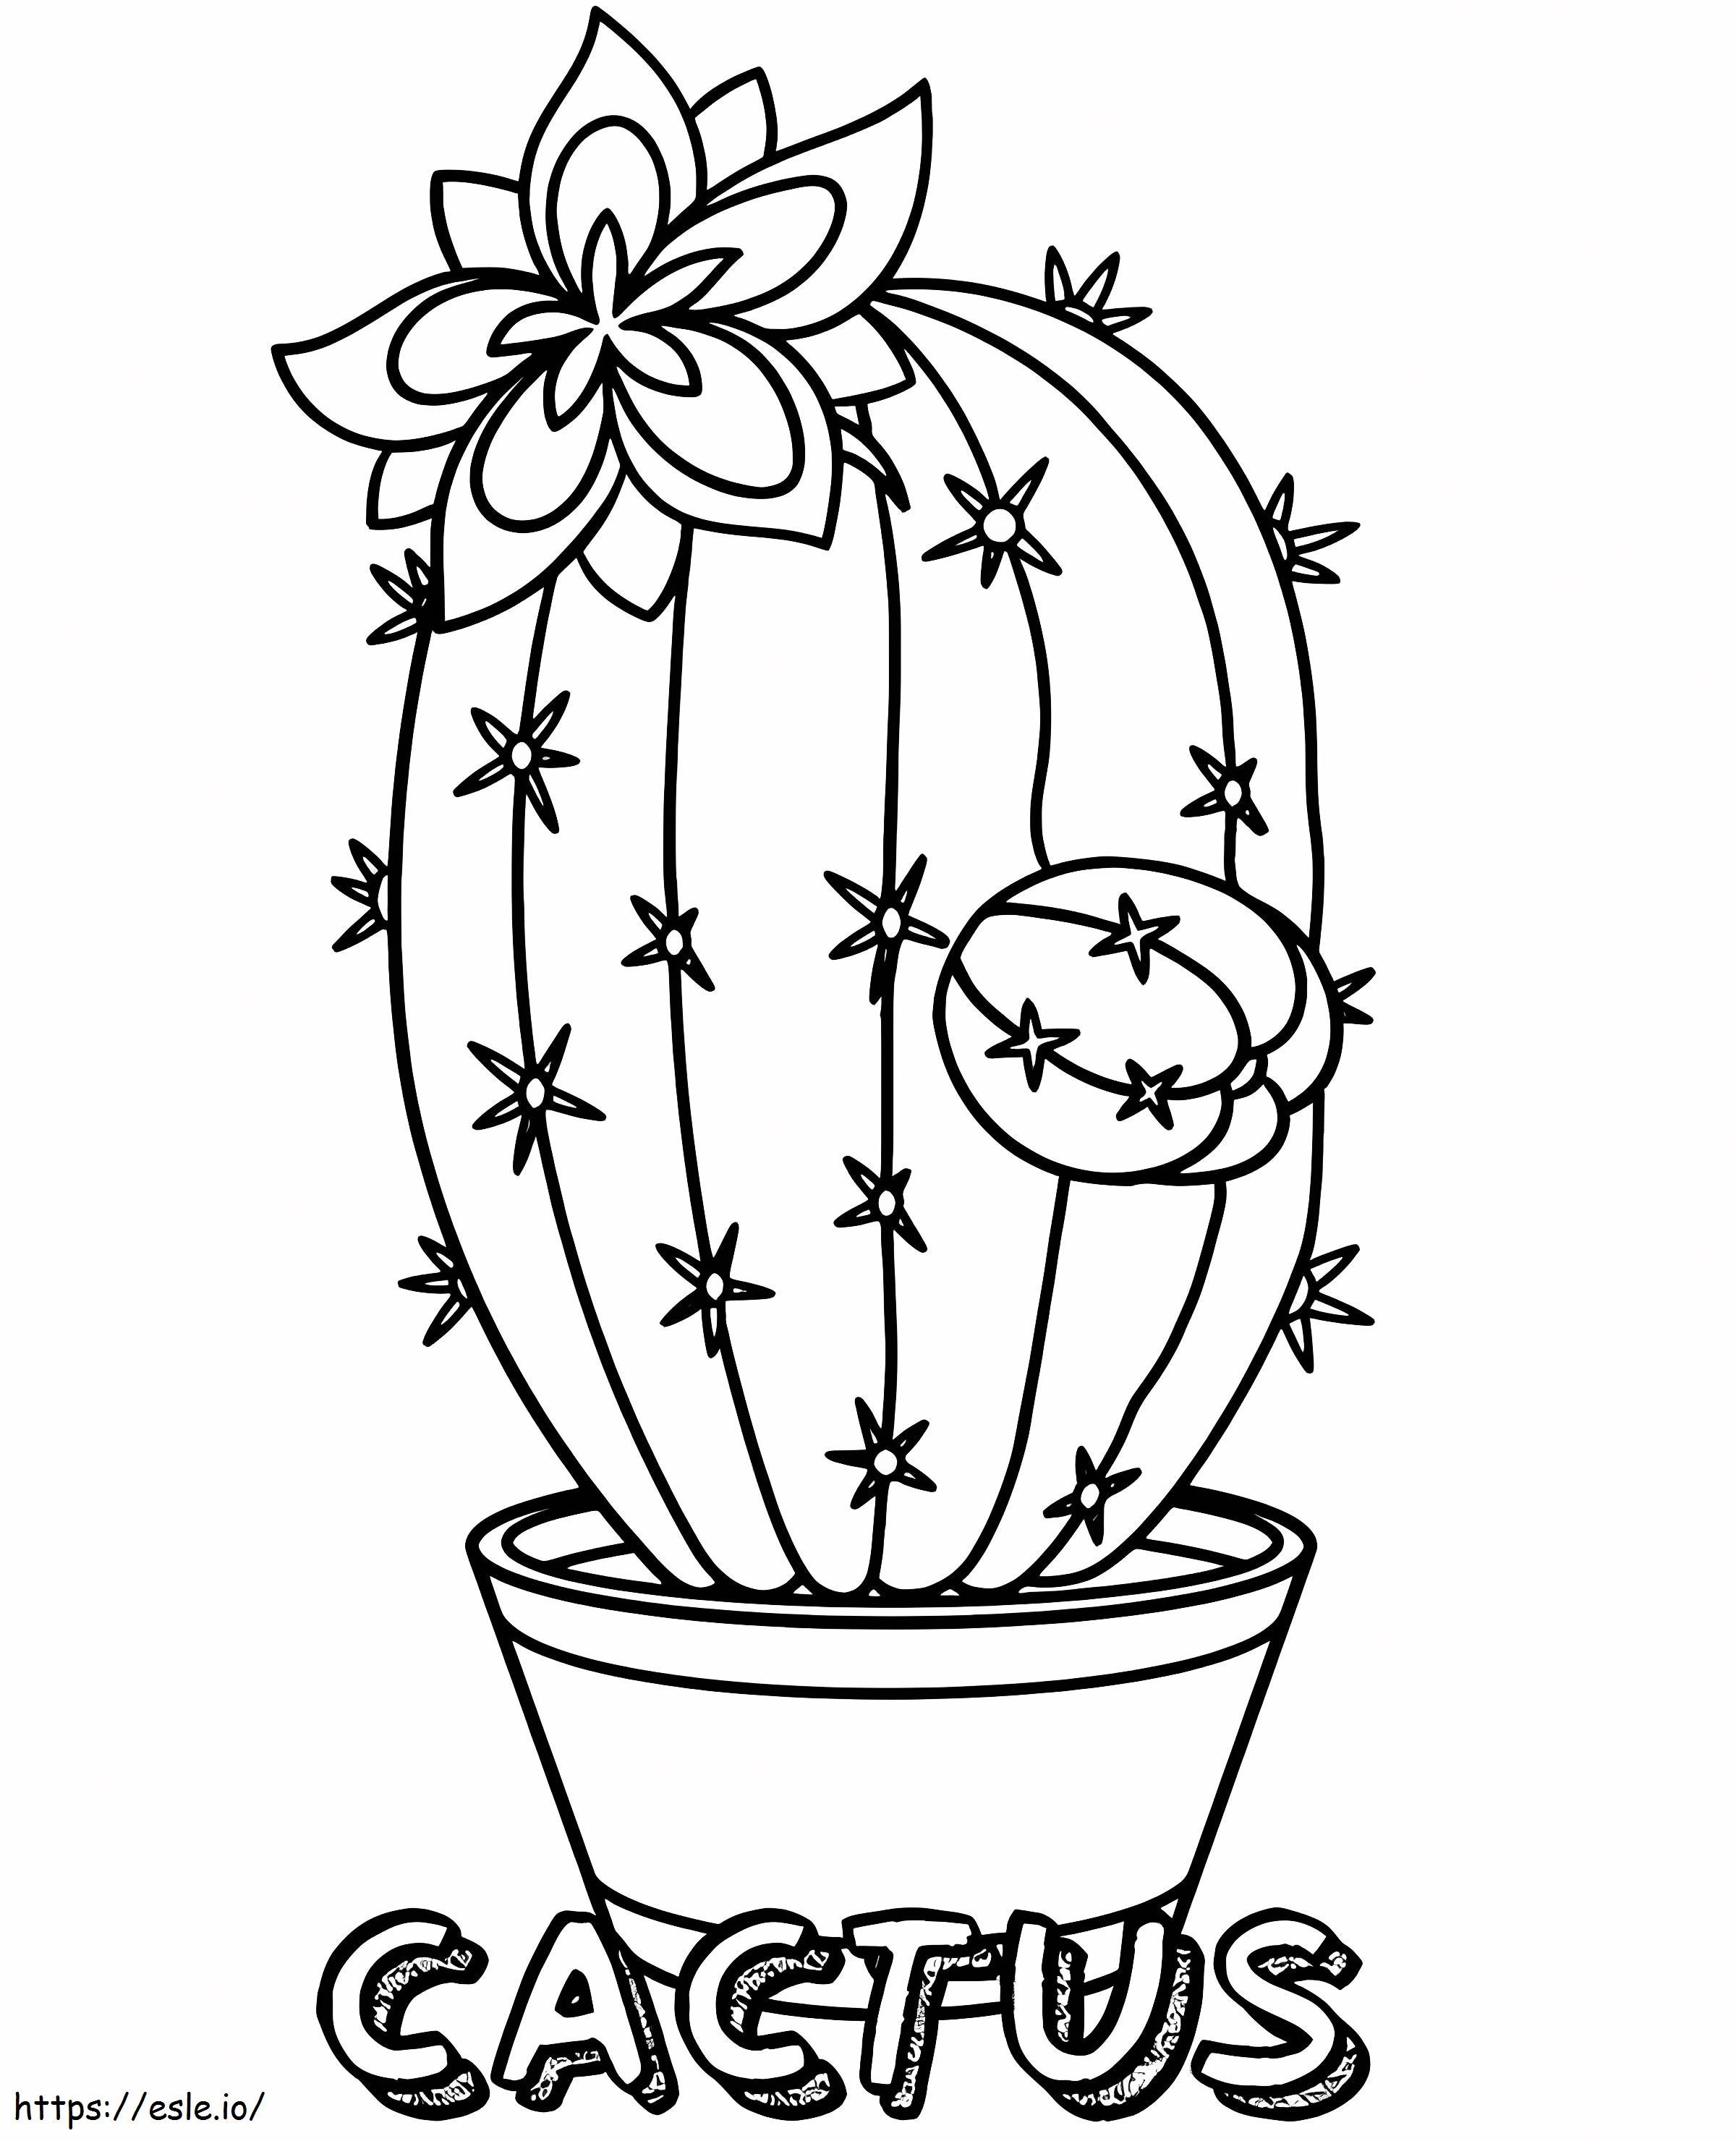 Basic Cactus coloring page